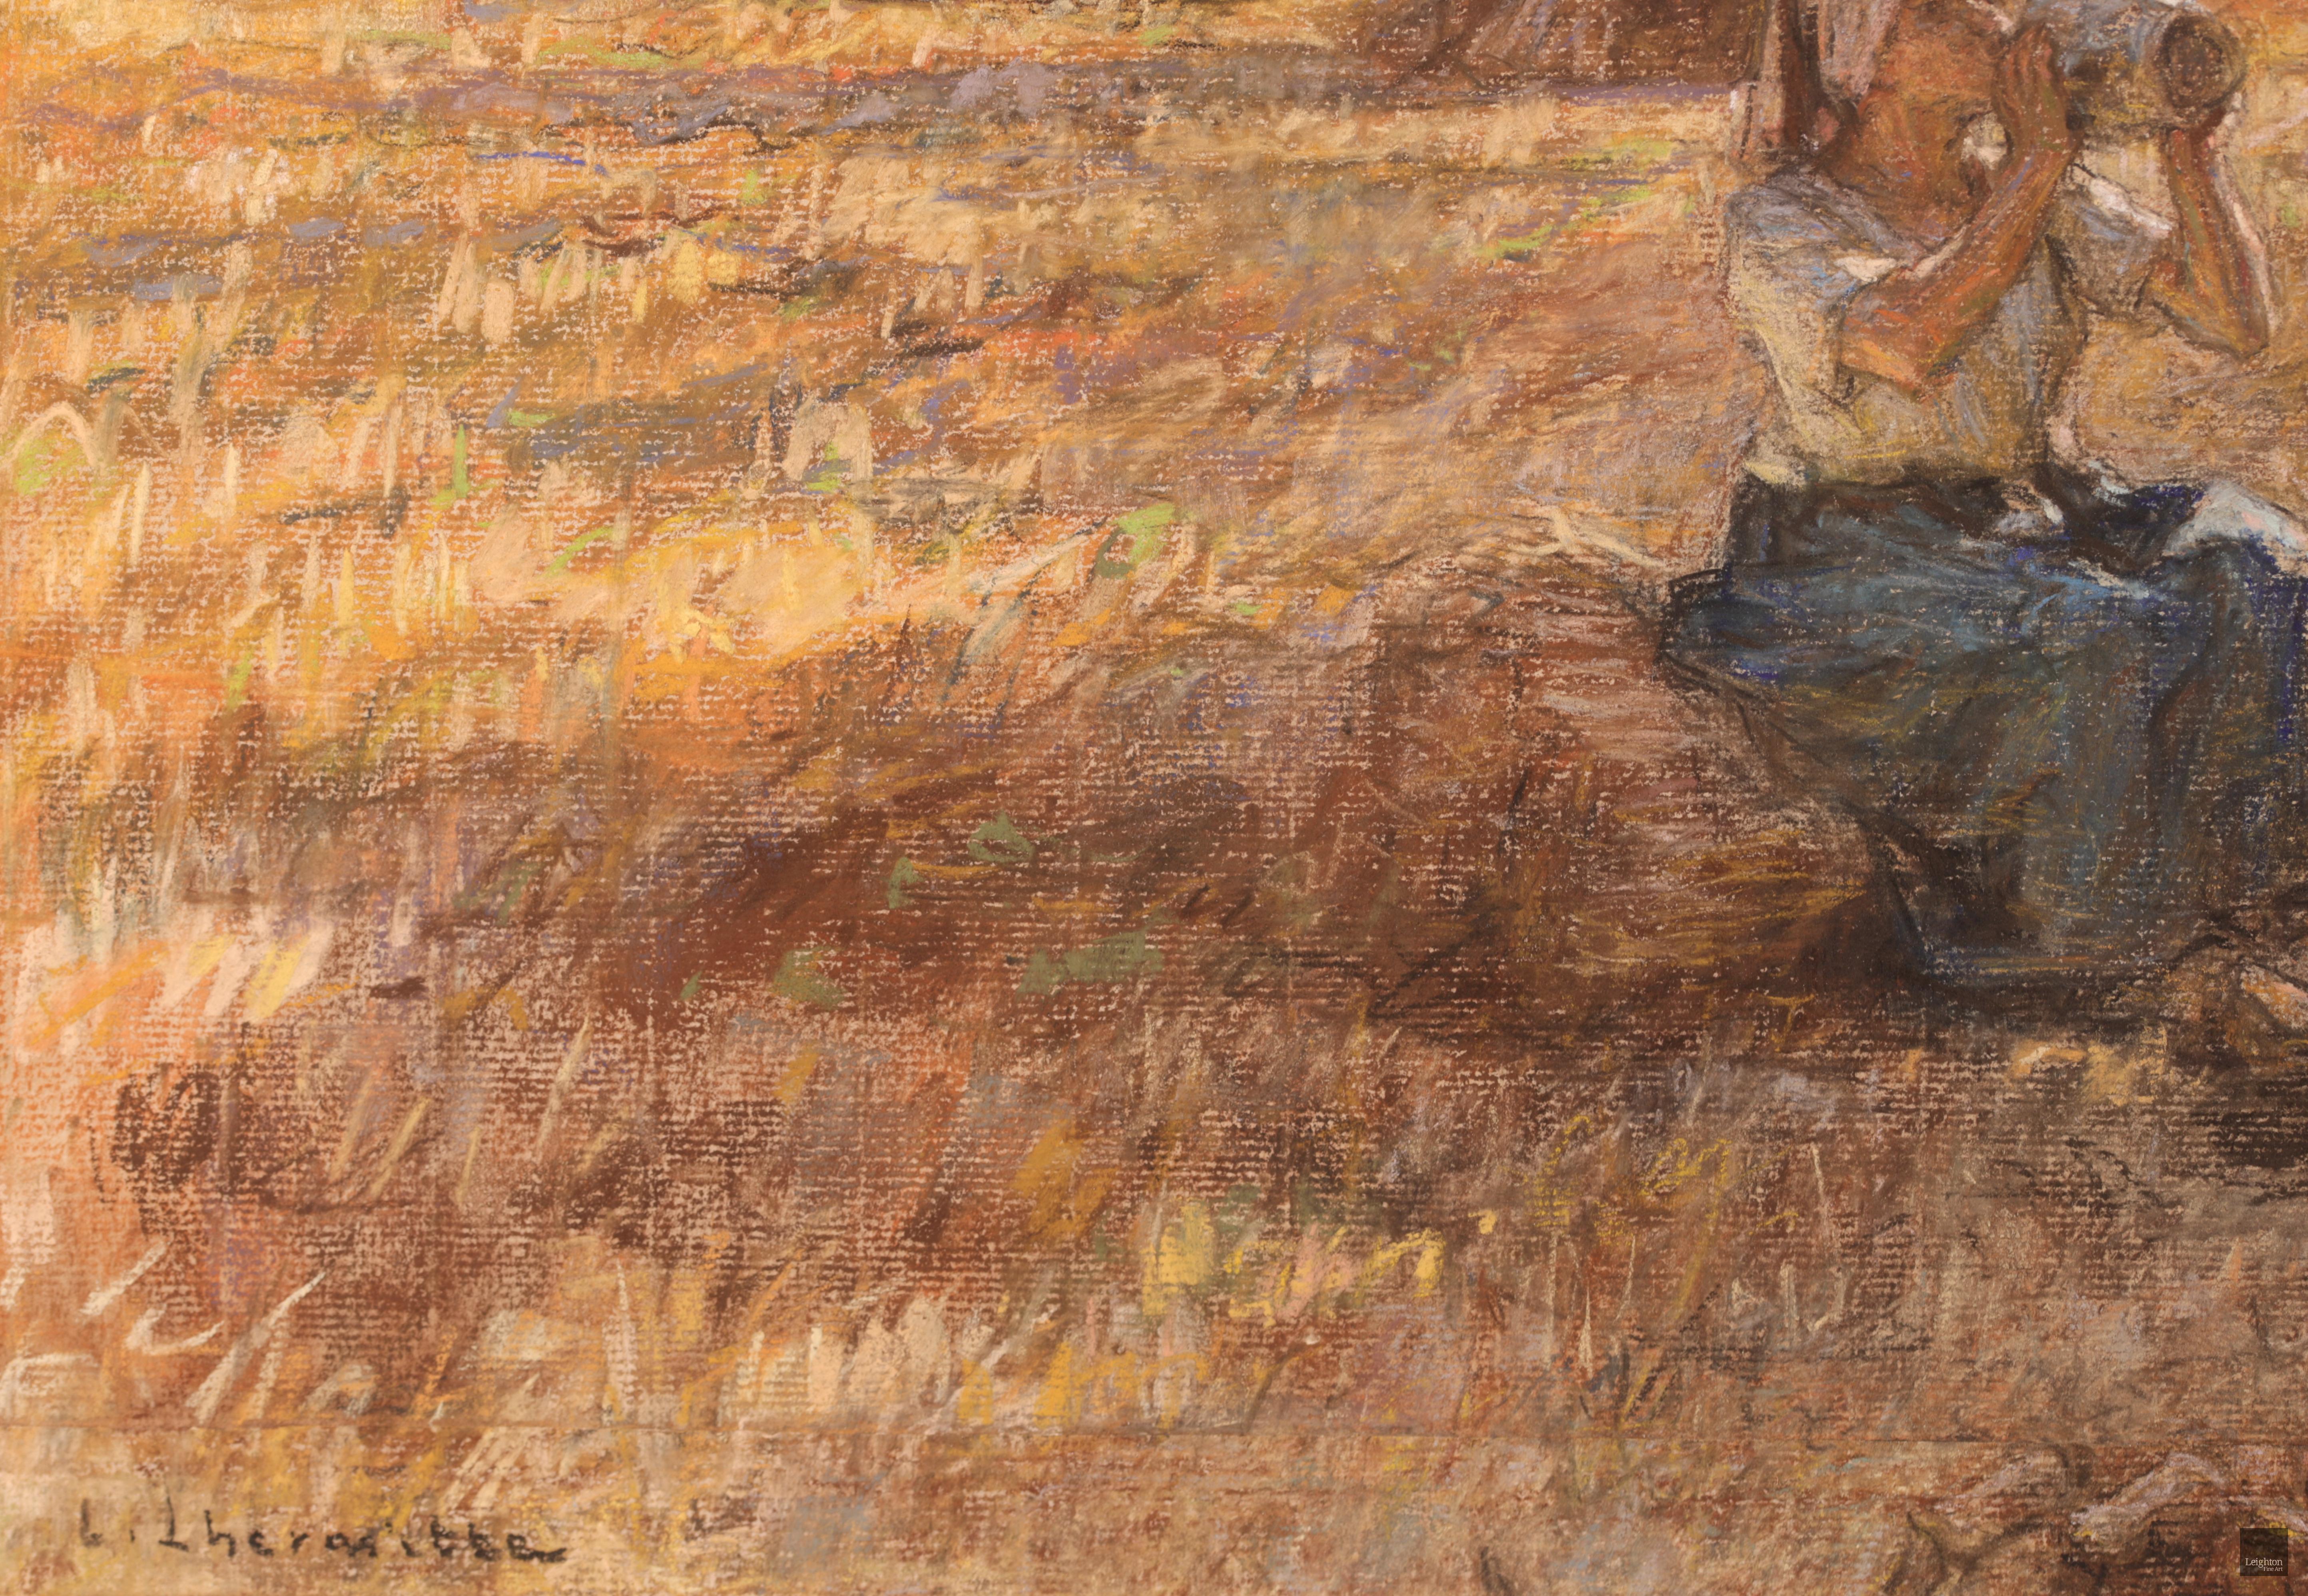 Signed Barbizon figures in landscape pastel on paper laid on canvas circa 1902 by French painter Leon Augustin Lhermitte. The piece depicts works in a field enjoying a snack as they take a rest from harvesting in the shade of a haystack. The fading